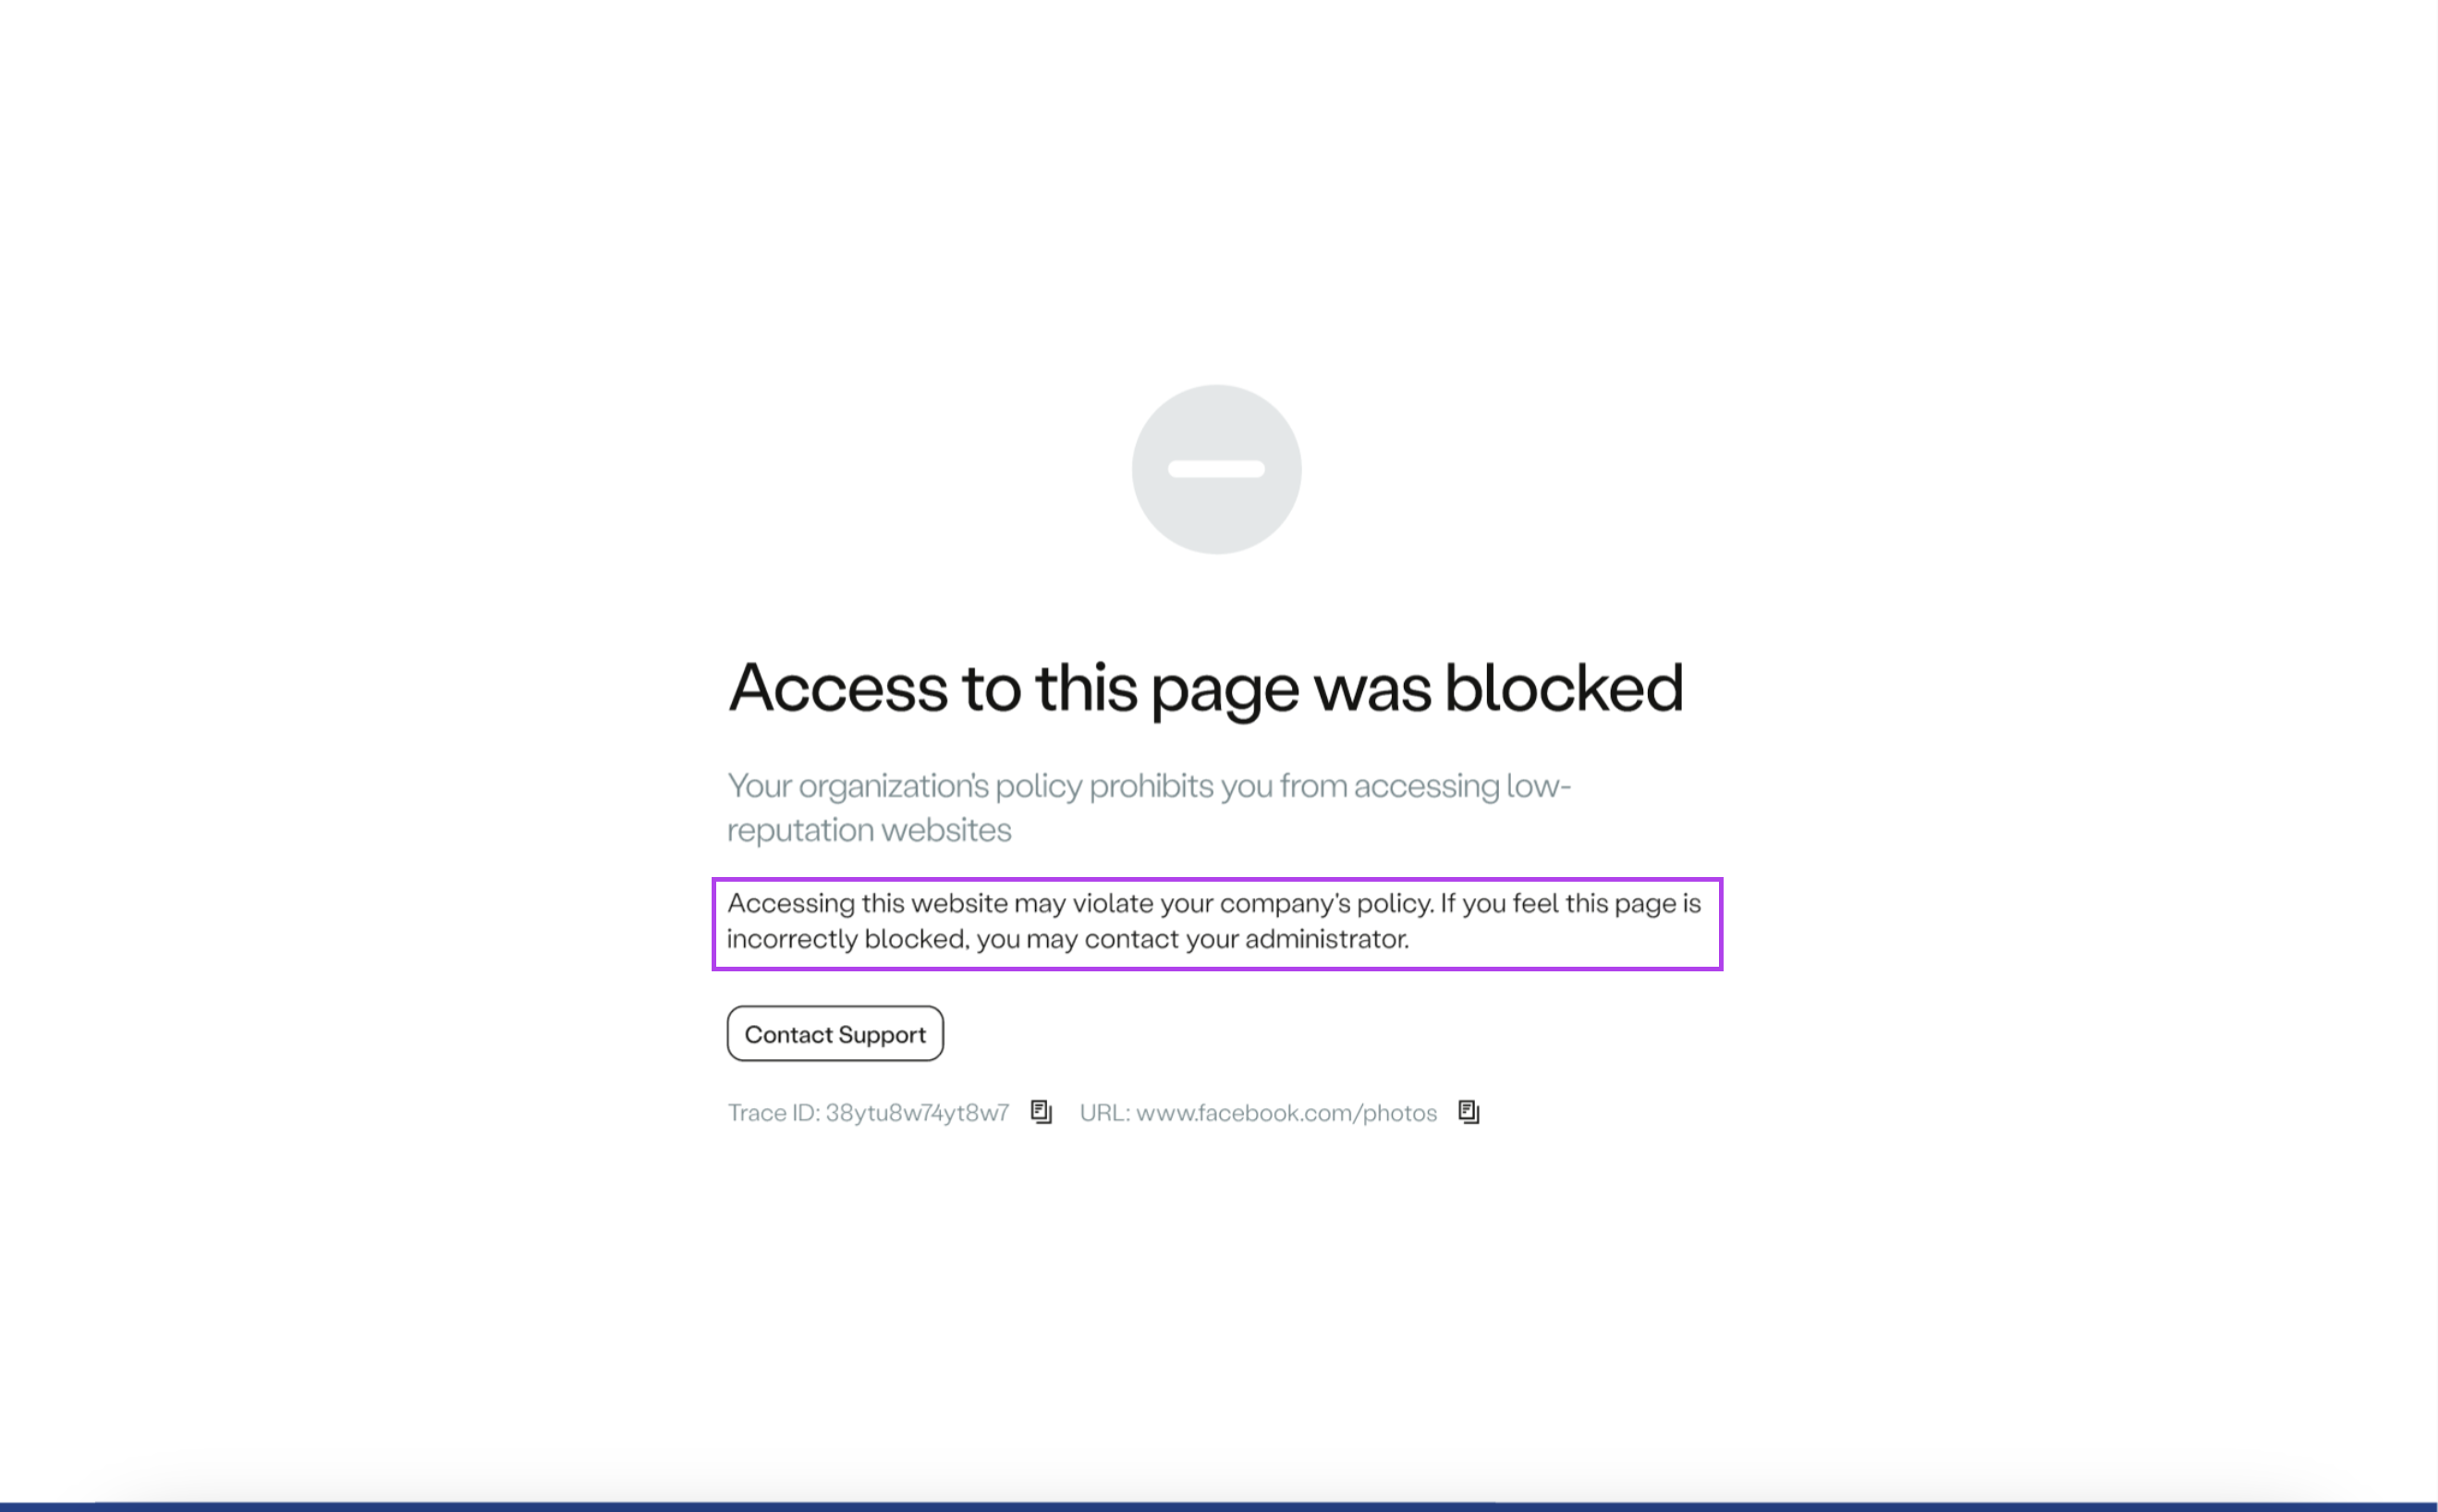 The end-user will come across a block page that displays the designated message content